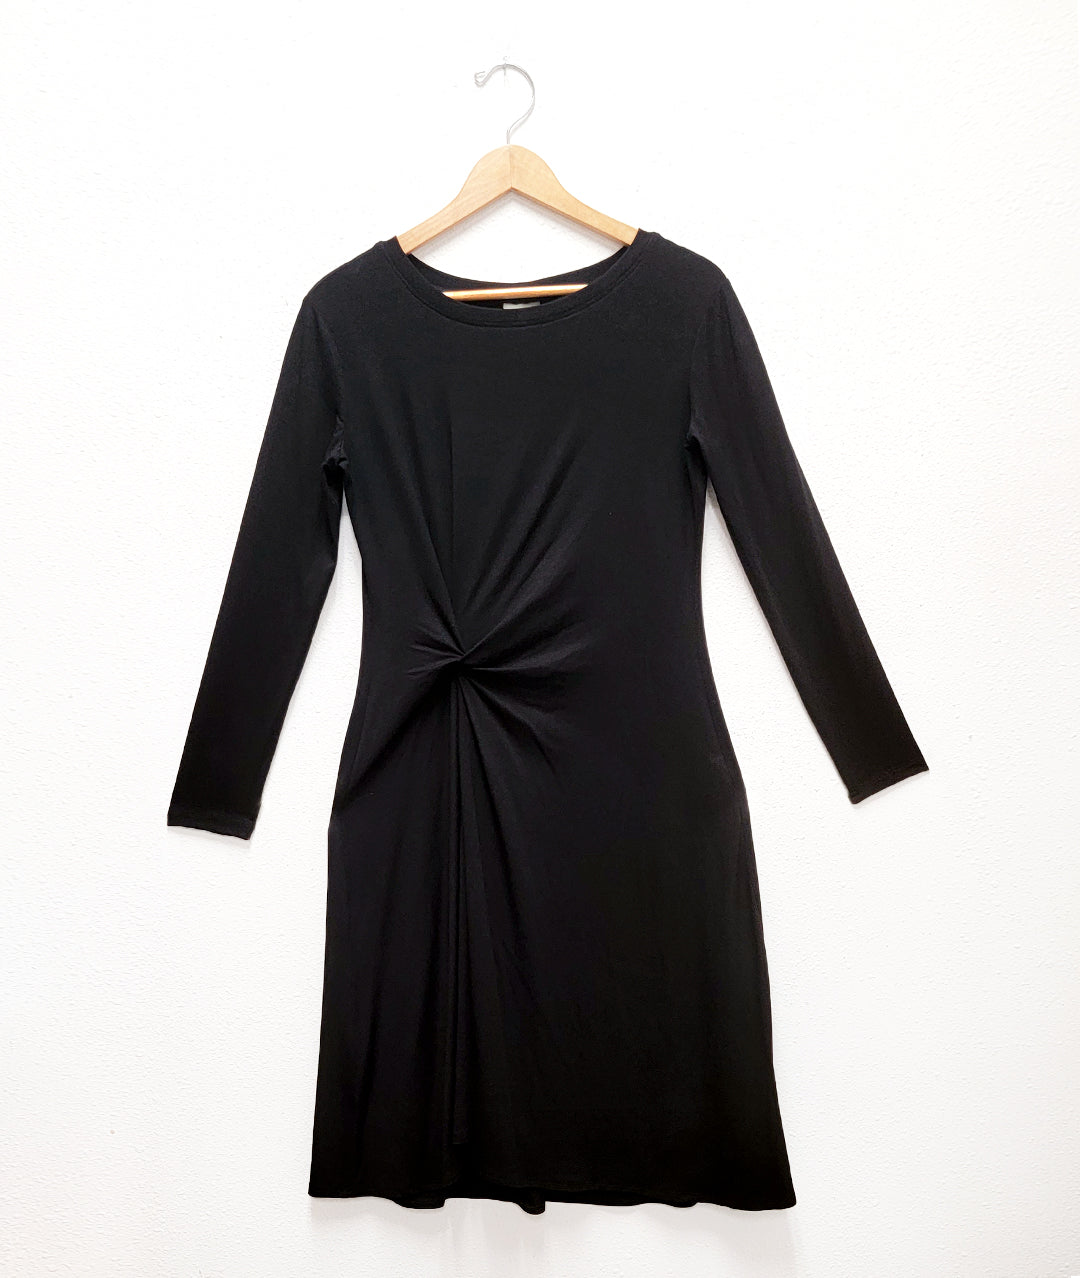 black dress with long sleeves and a twist detail at the waist, on a hanger against a white wall